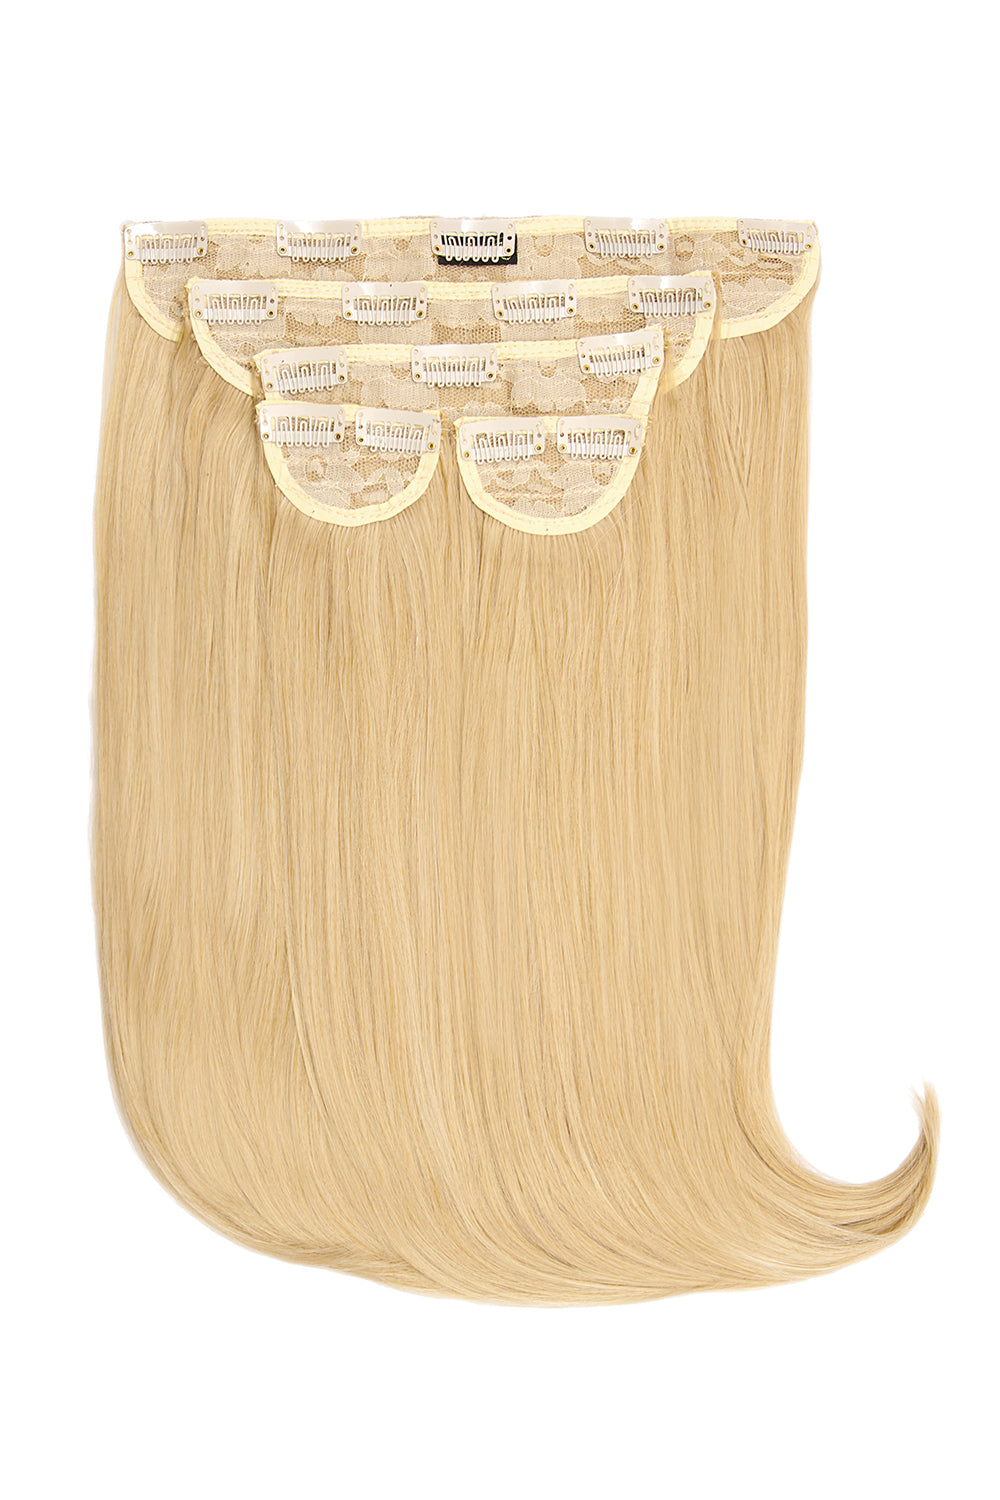 Super Thick 16" 5 Piece Curve Clip in Hair Extensions + Hair Care Bundle - Golden Blonde